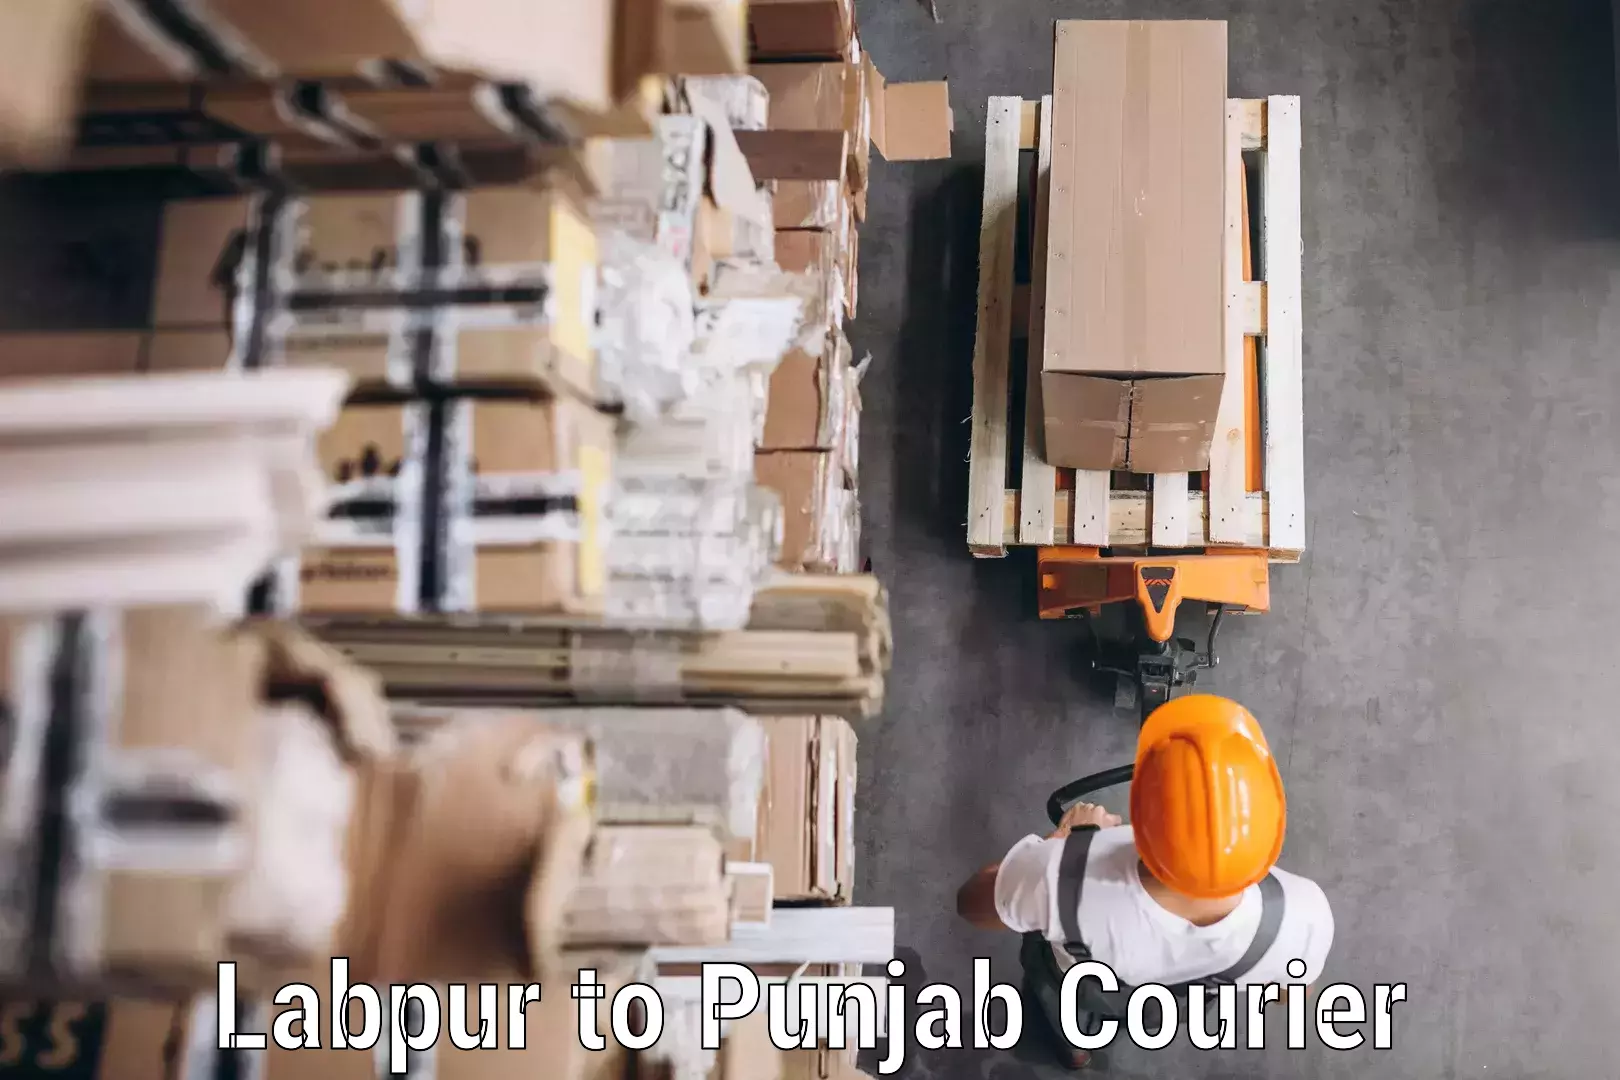 Courier app Labpur to Thapar Institute of Engineering and Technology Patiala